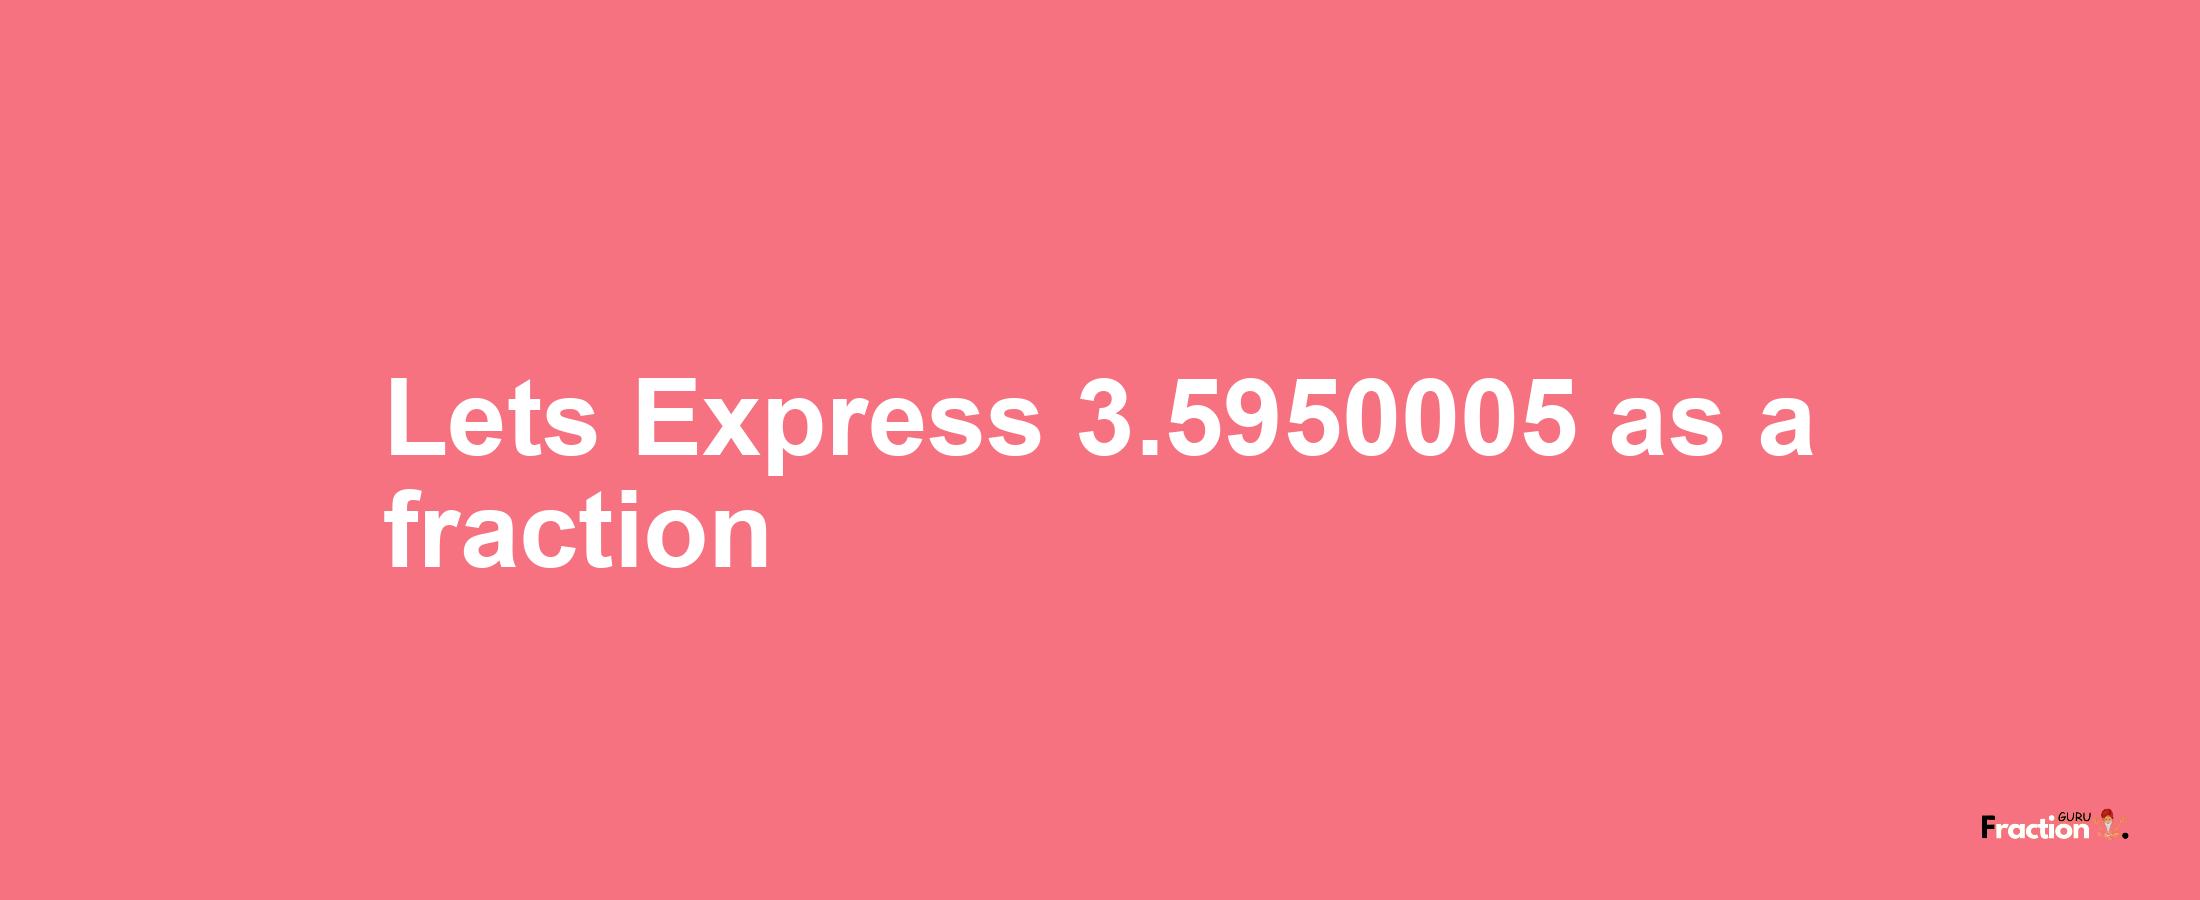 Lets Express 3.5950005 as afraction